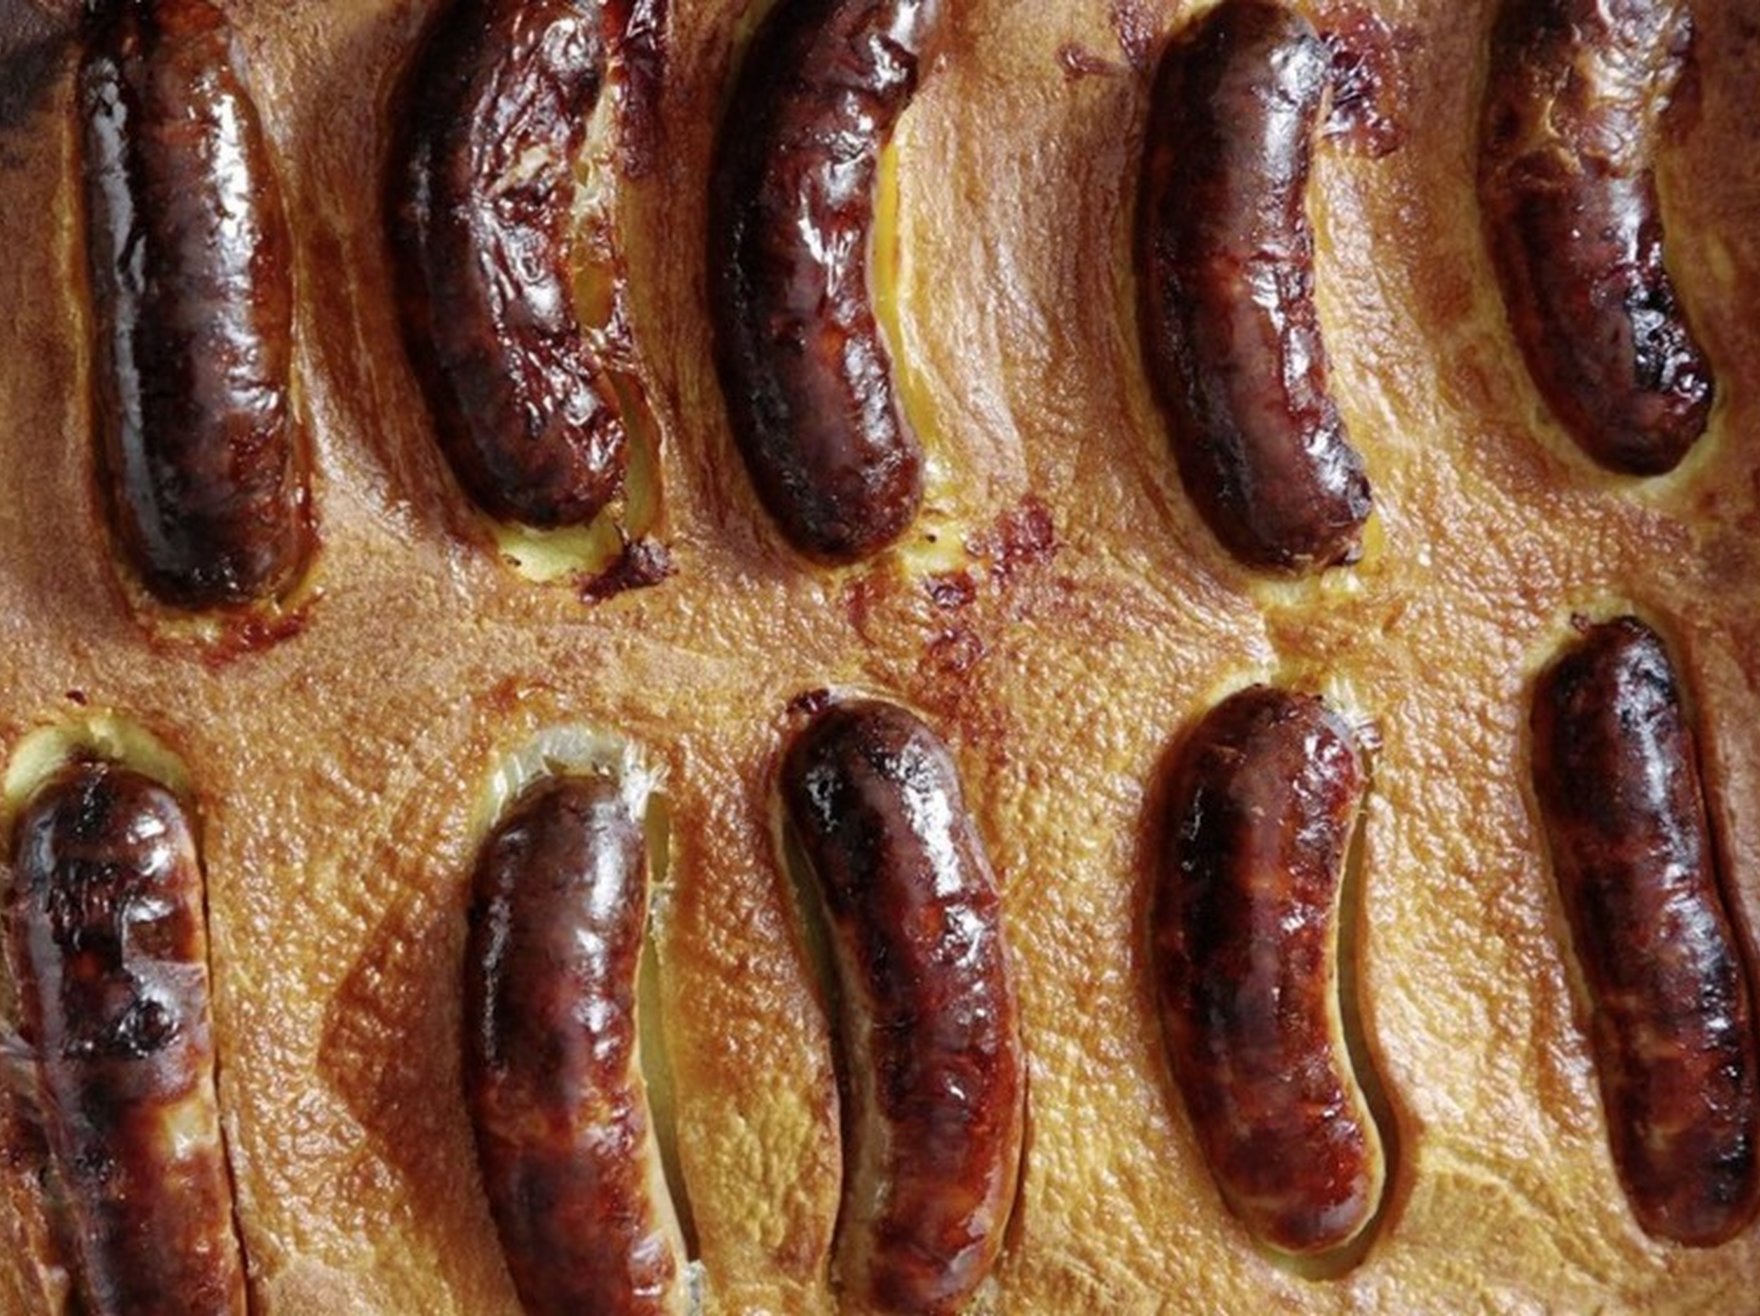 James St South Recipes: Wet weather favourites toad in the hole and baked rice pudding